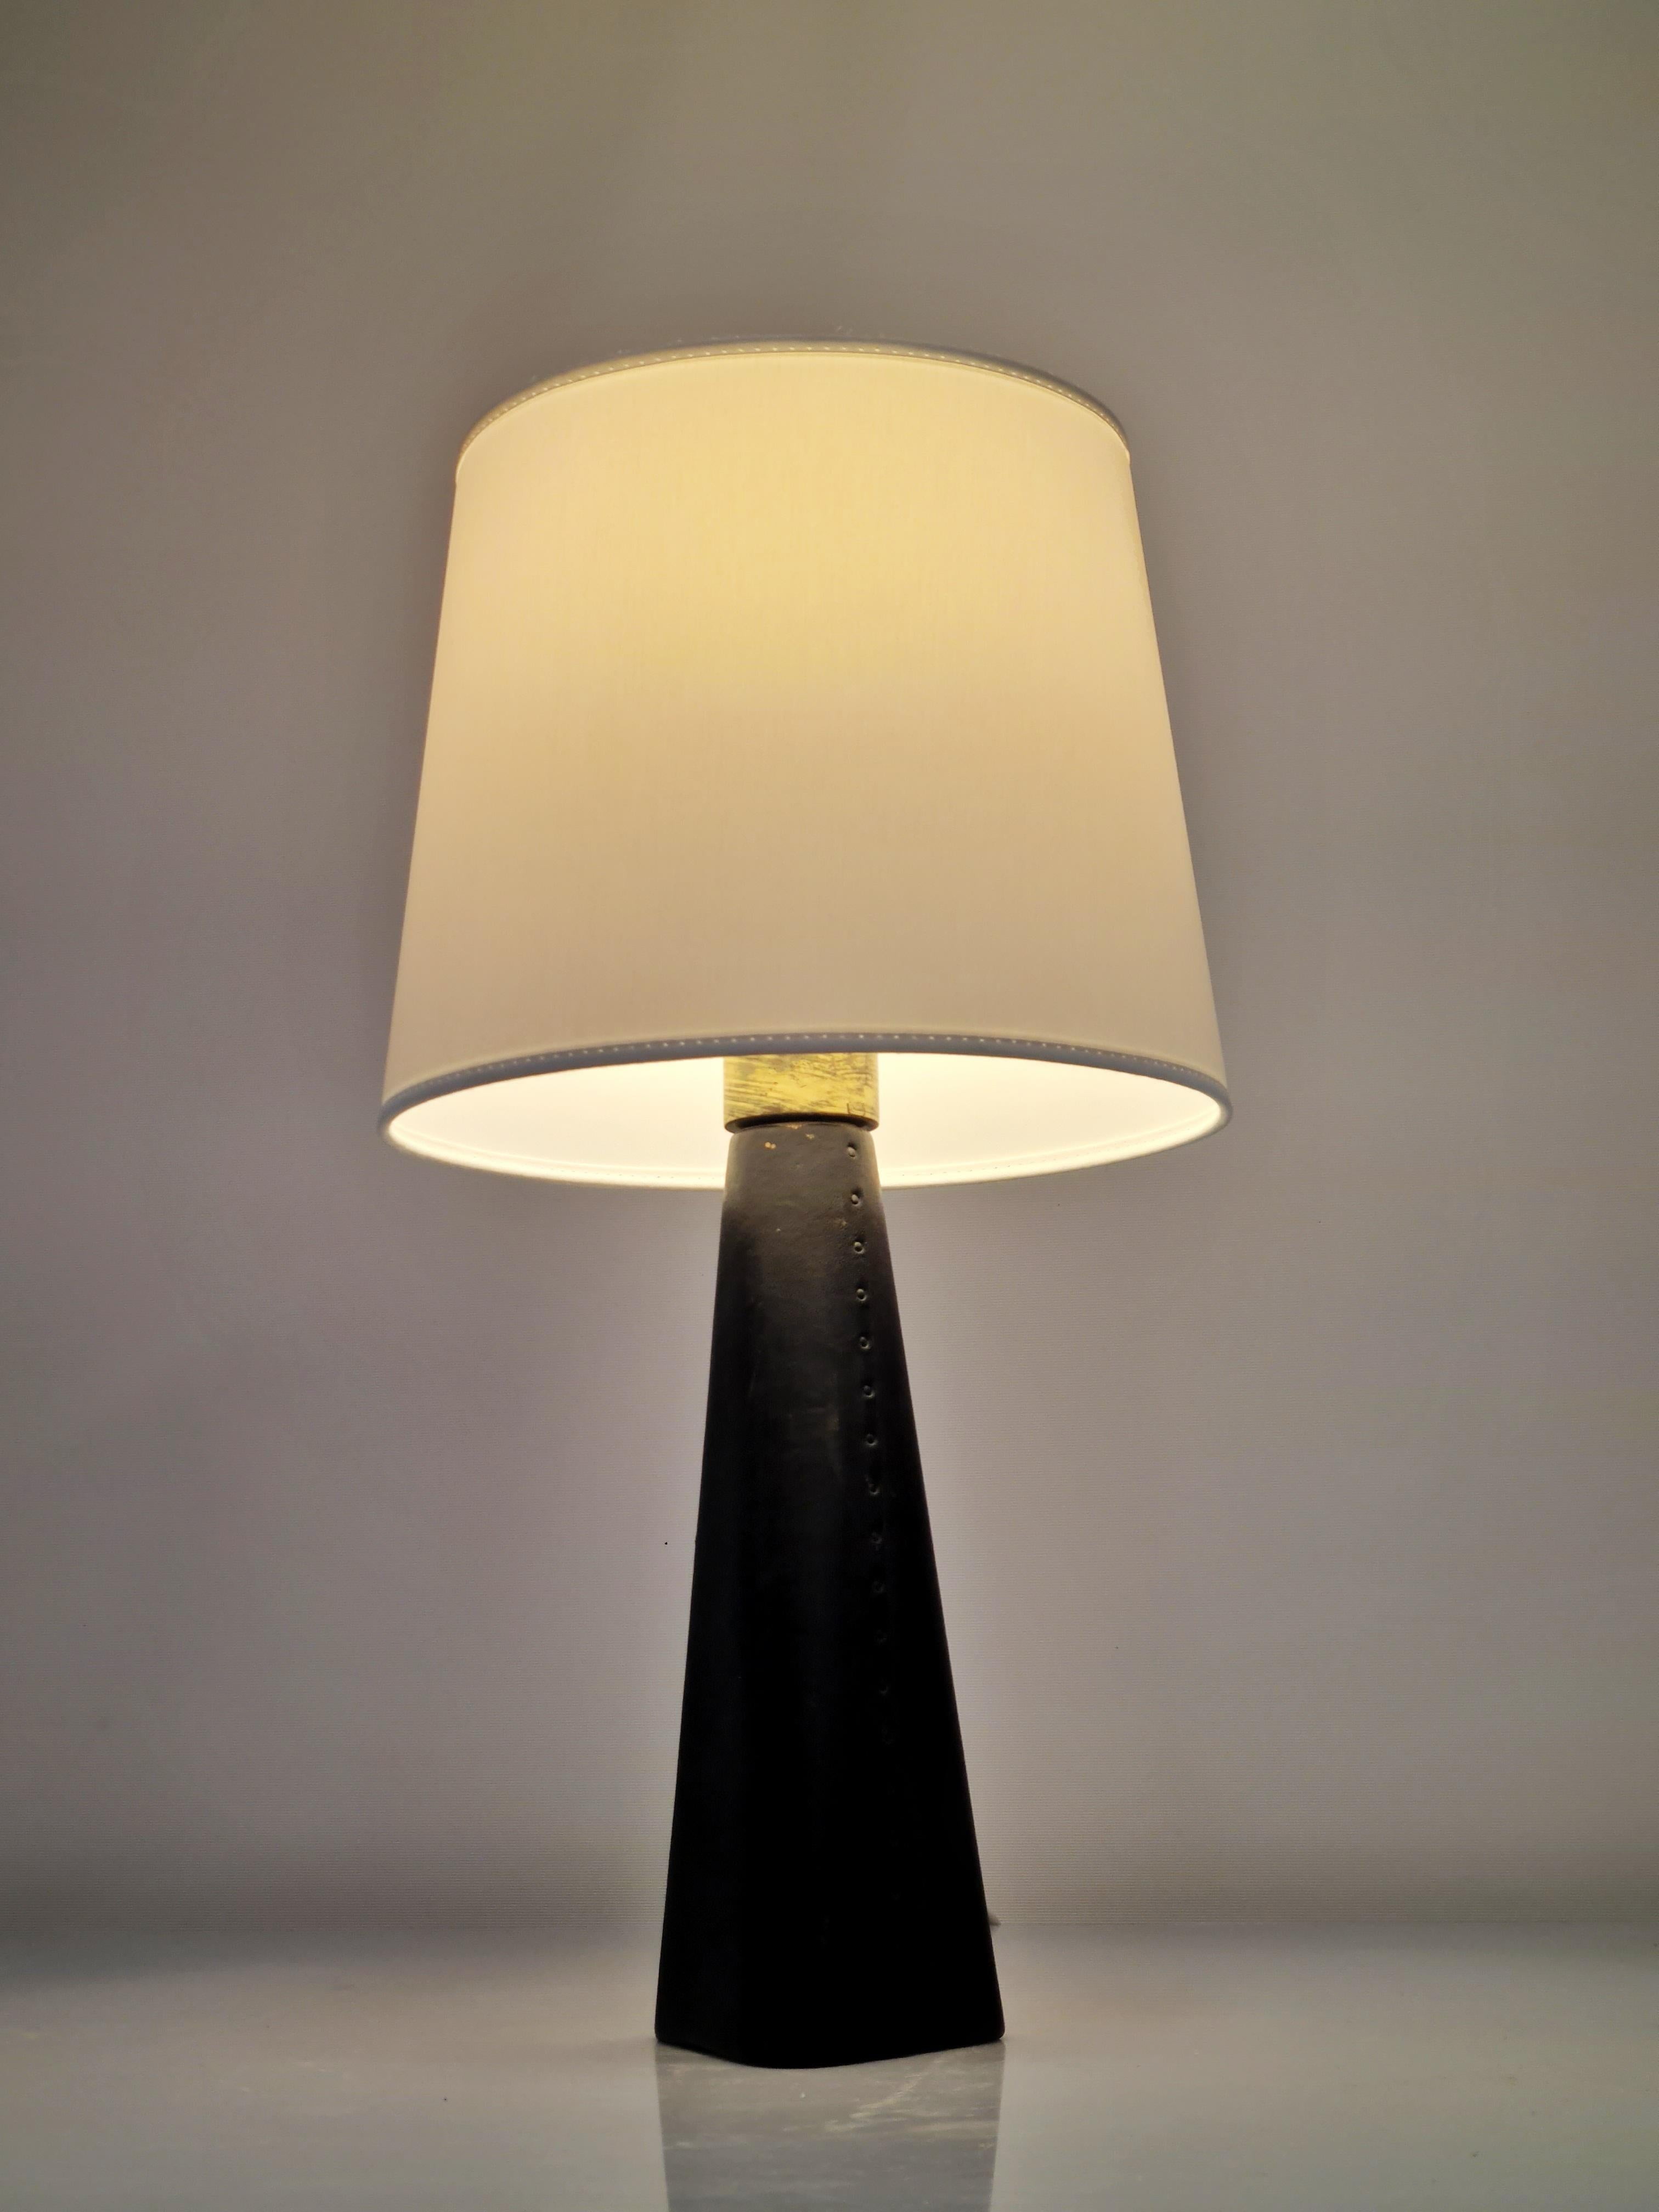 A rare and special Lisa Johansson-Pape table lamp model 46-186 designed for the University of Helsinki. This lamp is much harder to come by than some of the other Pape models and certainly stands out. The lamp consists of a wooden base covered in